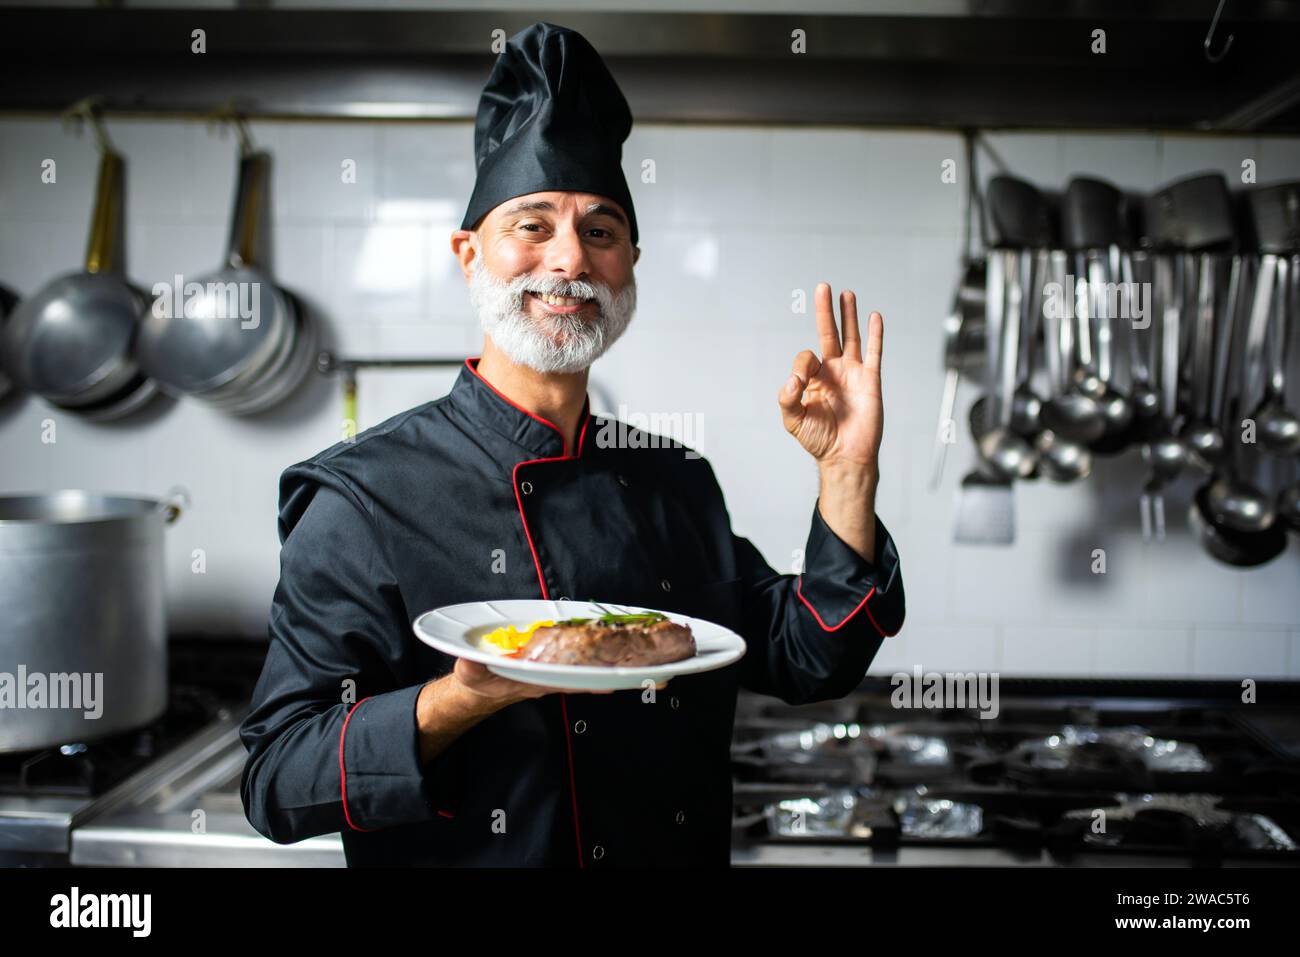 Mature chef holding a meat dish and doing the ok sign Stock Photo